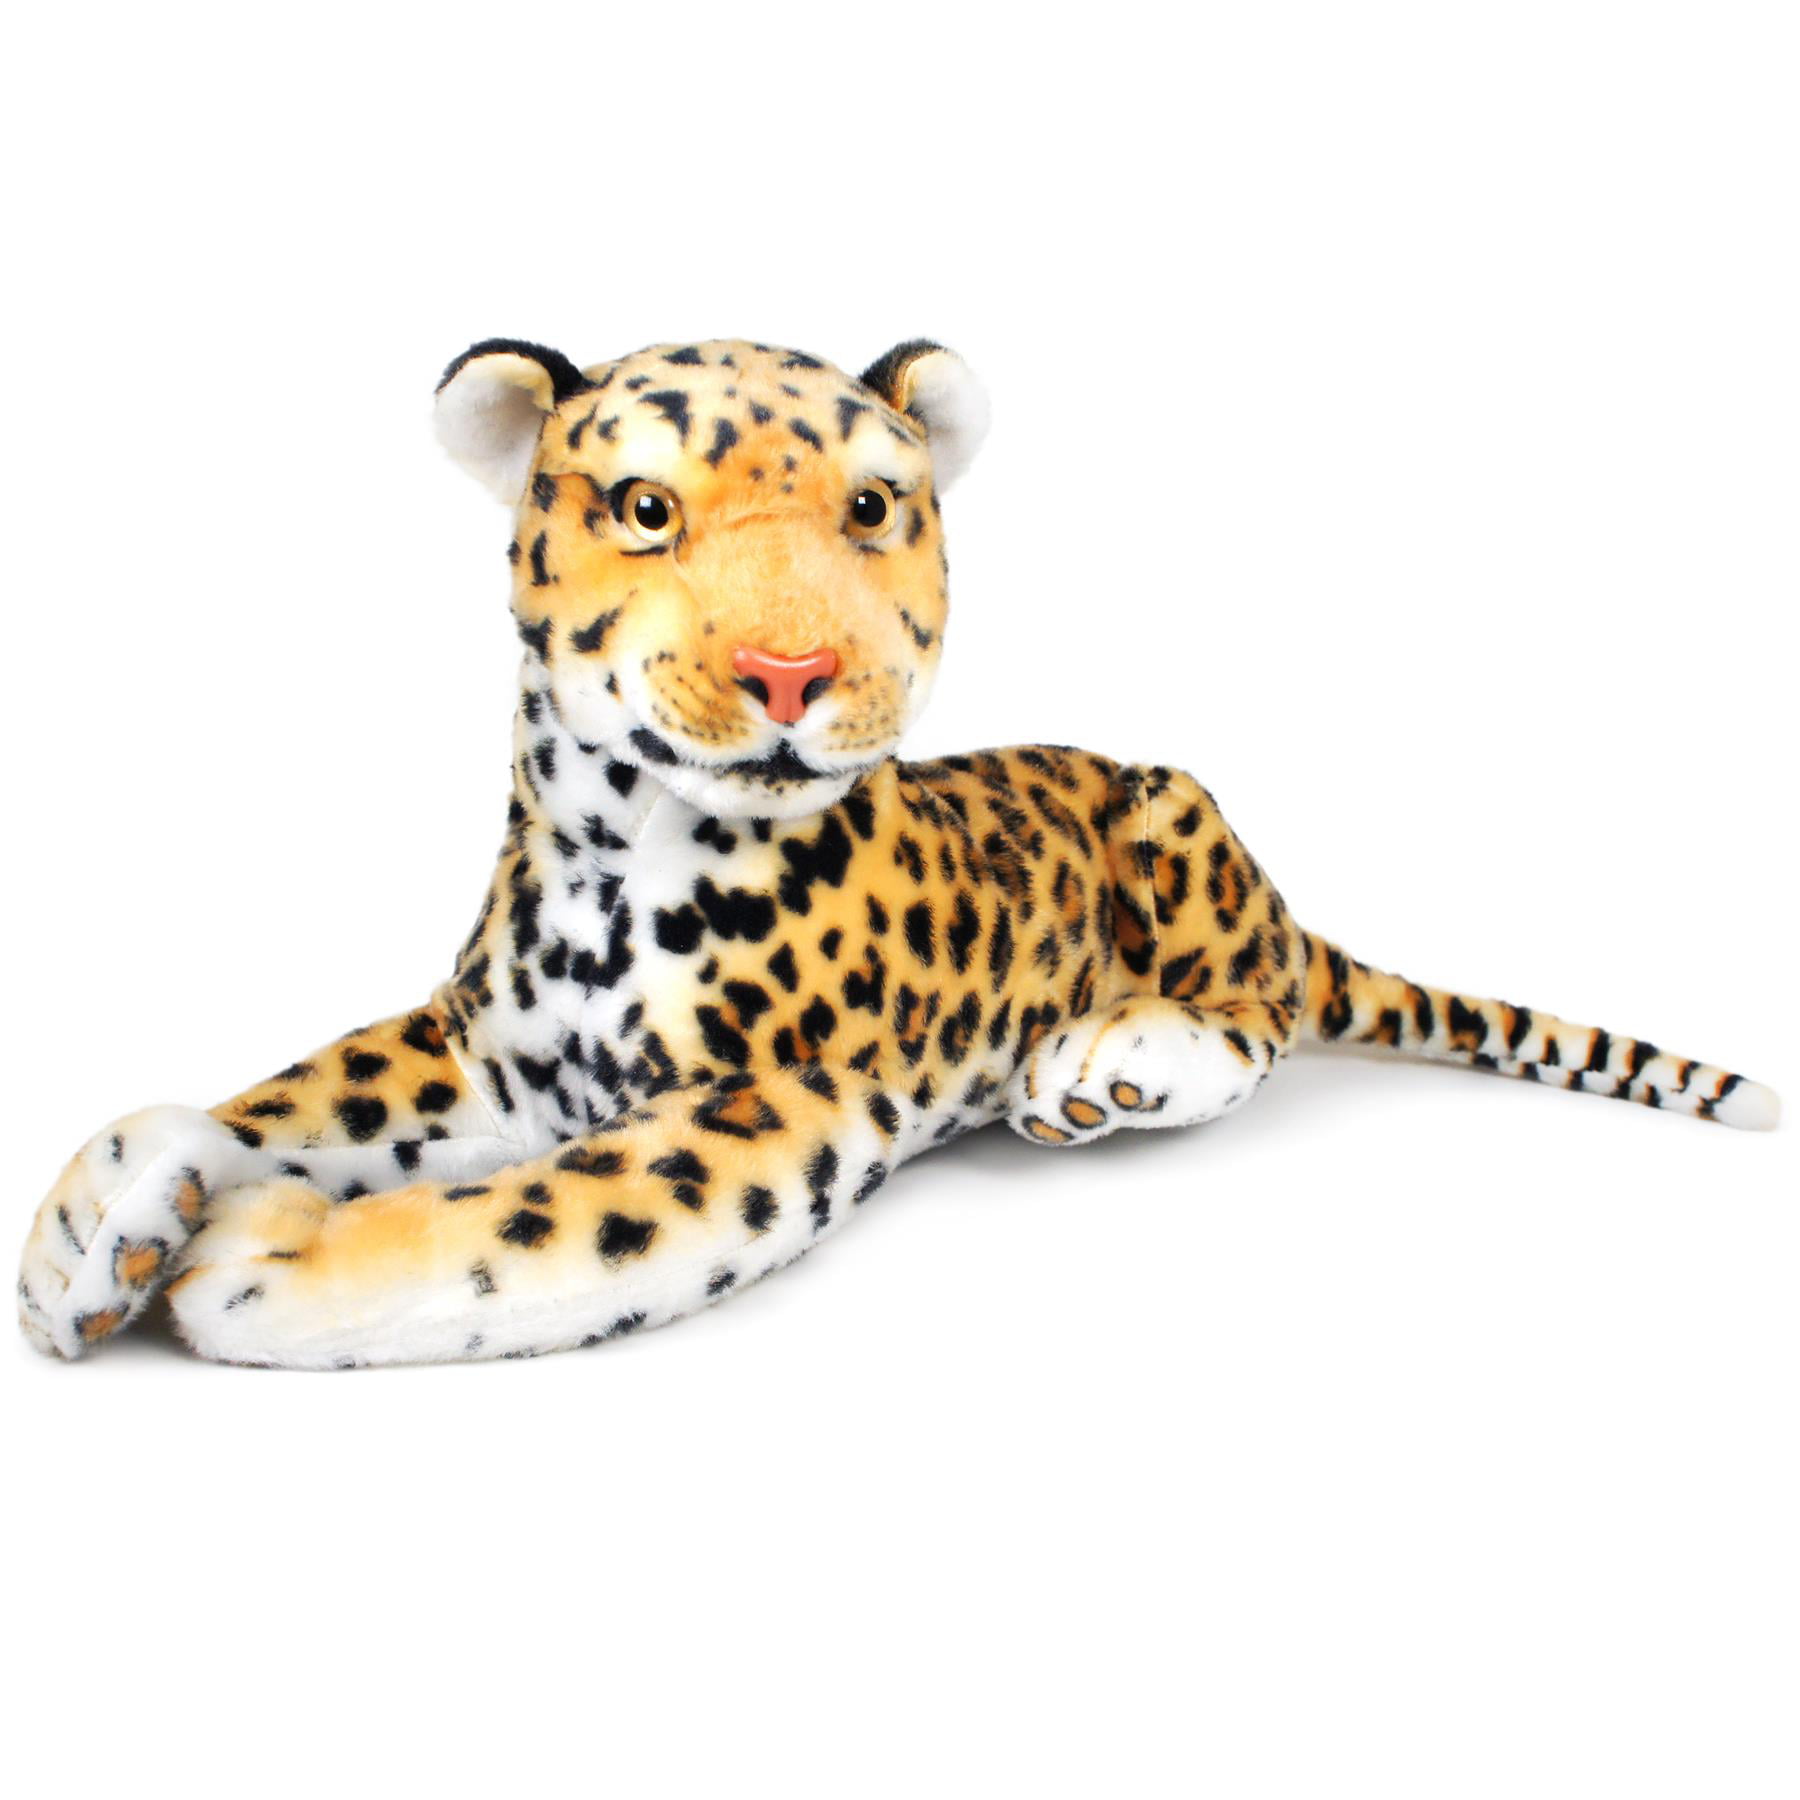 Plush Cat Sid The Panther 20 Inch Stuffed Toy Animal Figure by Tiger Tale Toys for sale online 